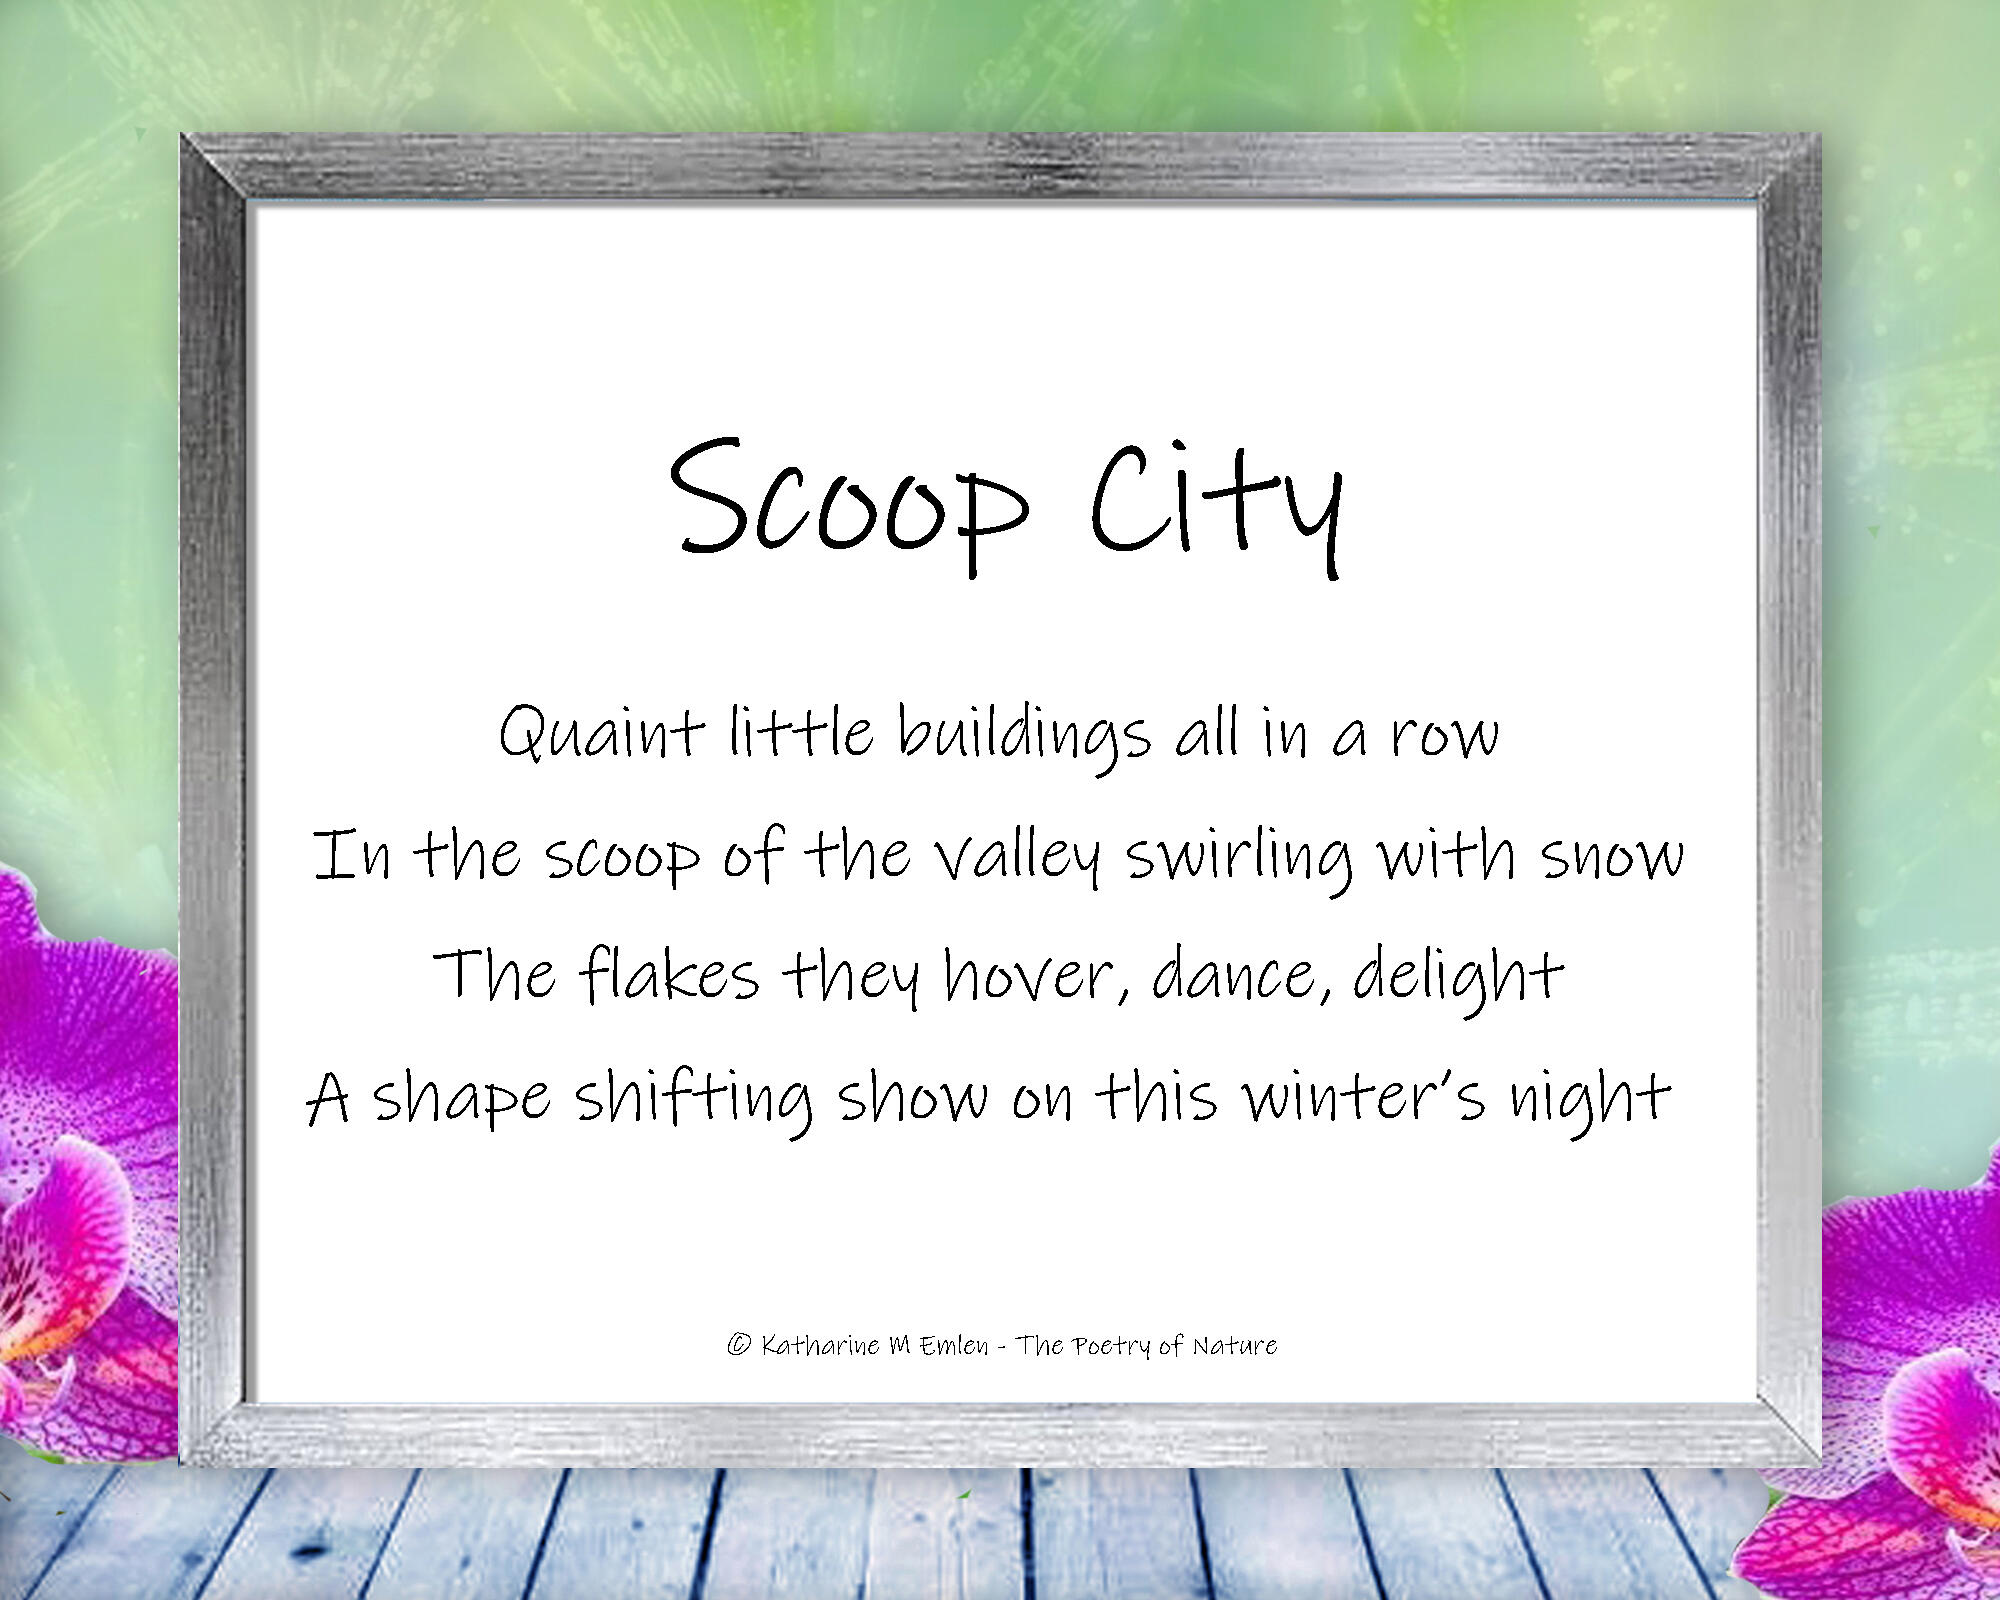 Poem for Scoop CIty - Swirling snow dances around a quaint little village in this imaginative, soothing, macro photo with poem - Scoop City by The Poetry of Nature